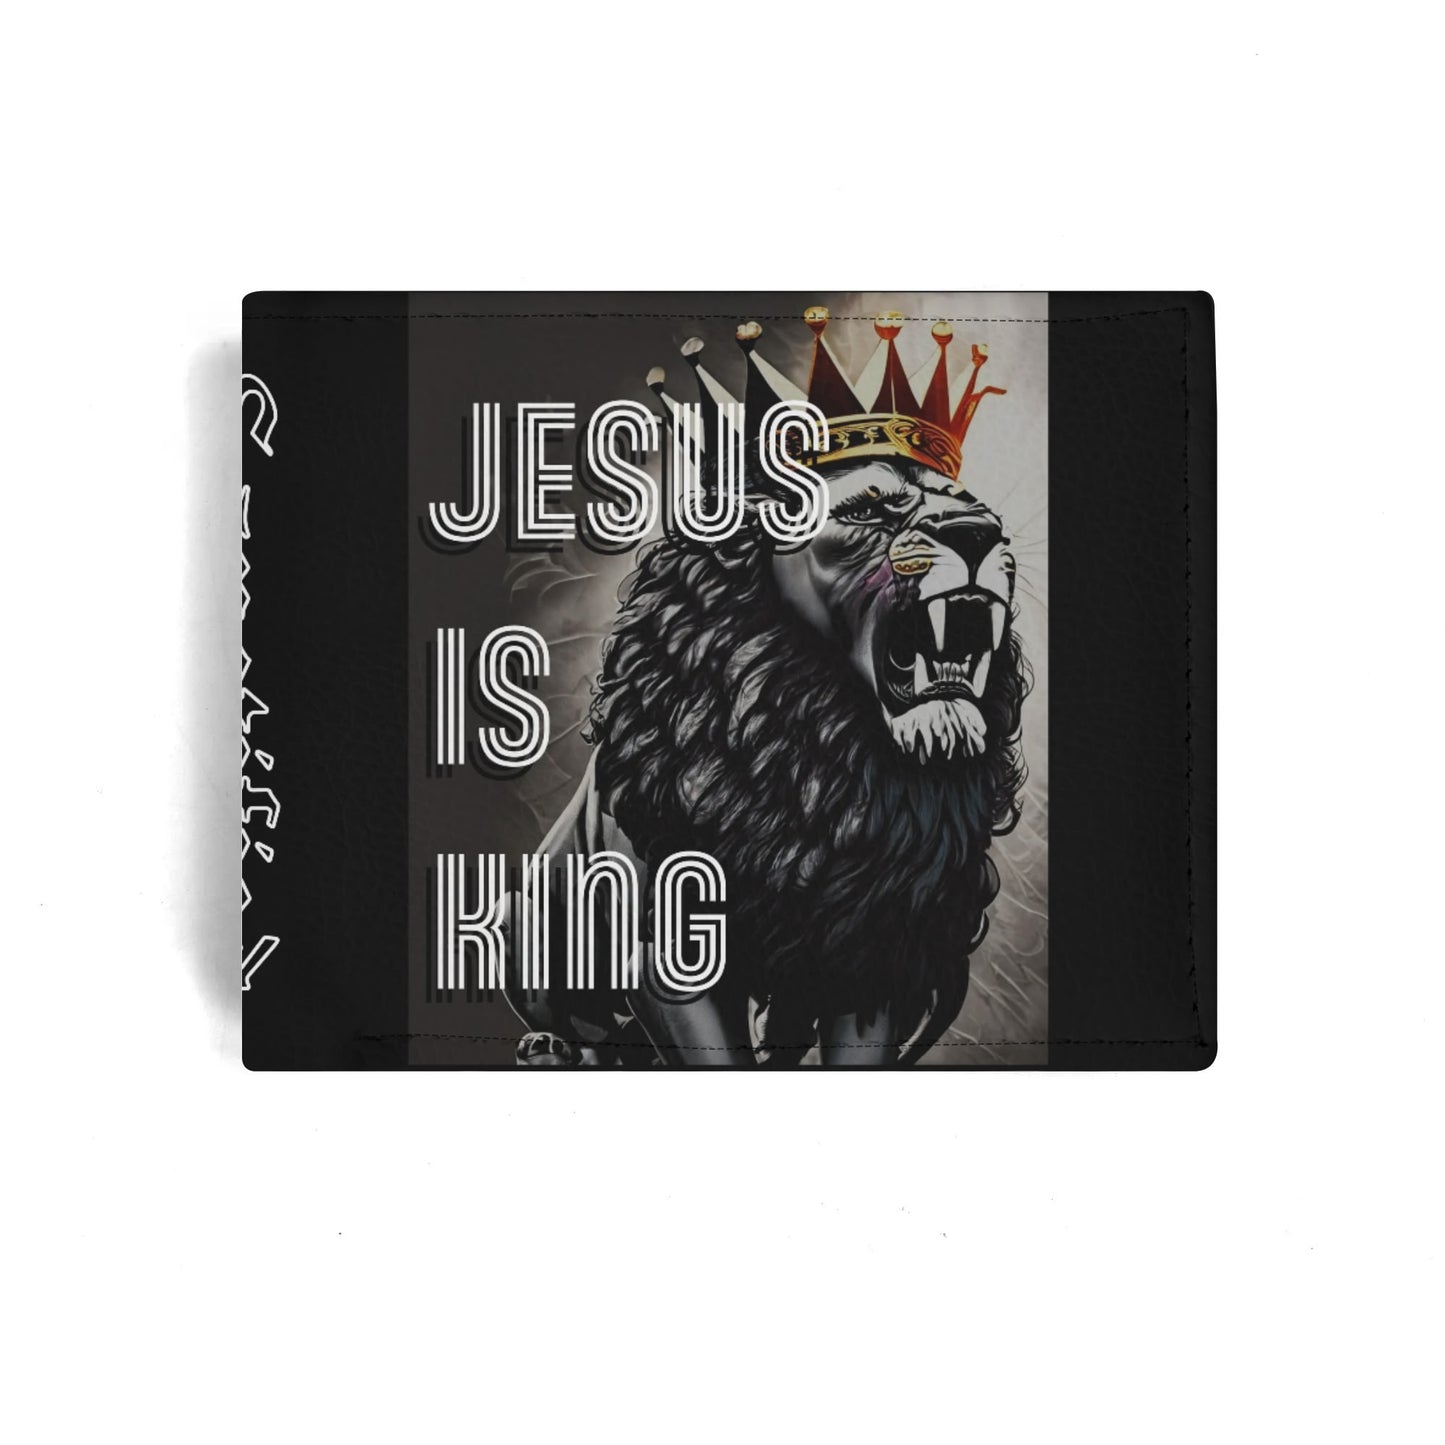 JESUS IS KING- PU Leather Wallet Paper Folded Wallet, FREE SHIPPING